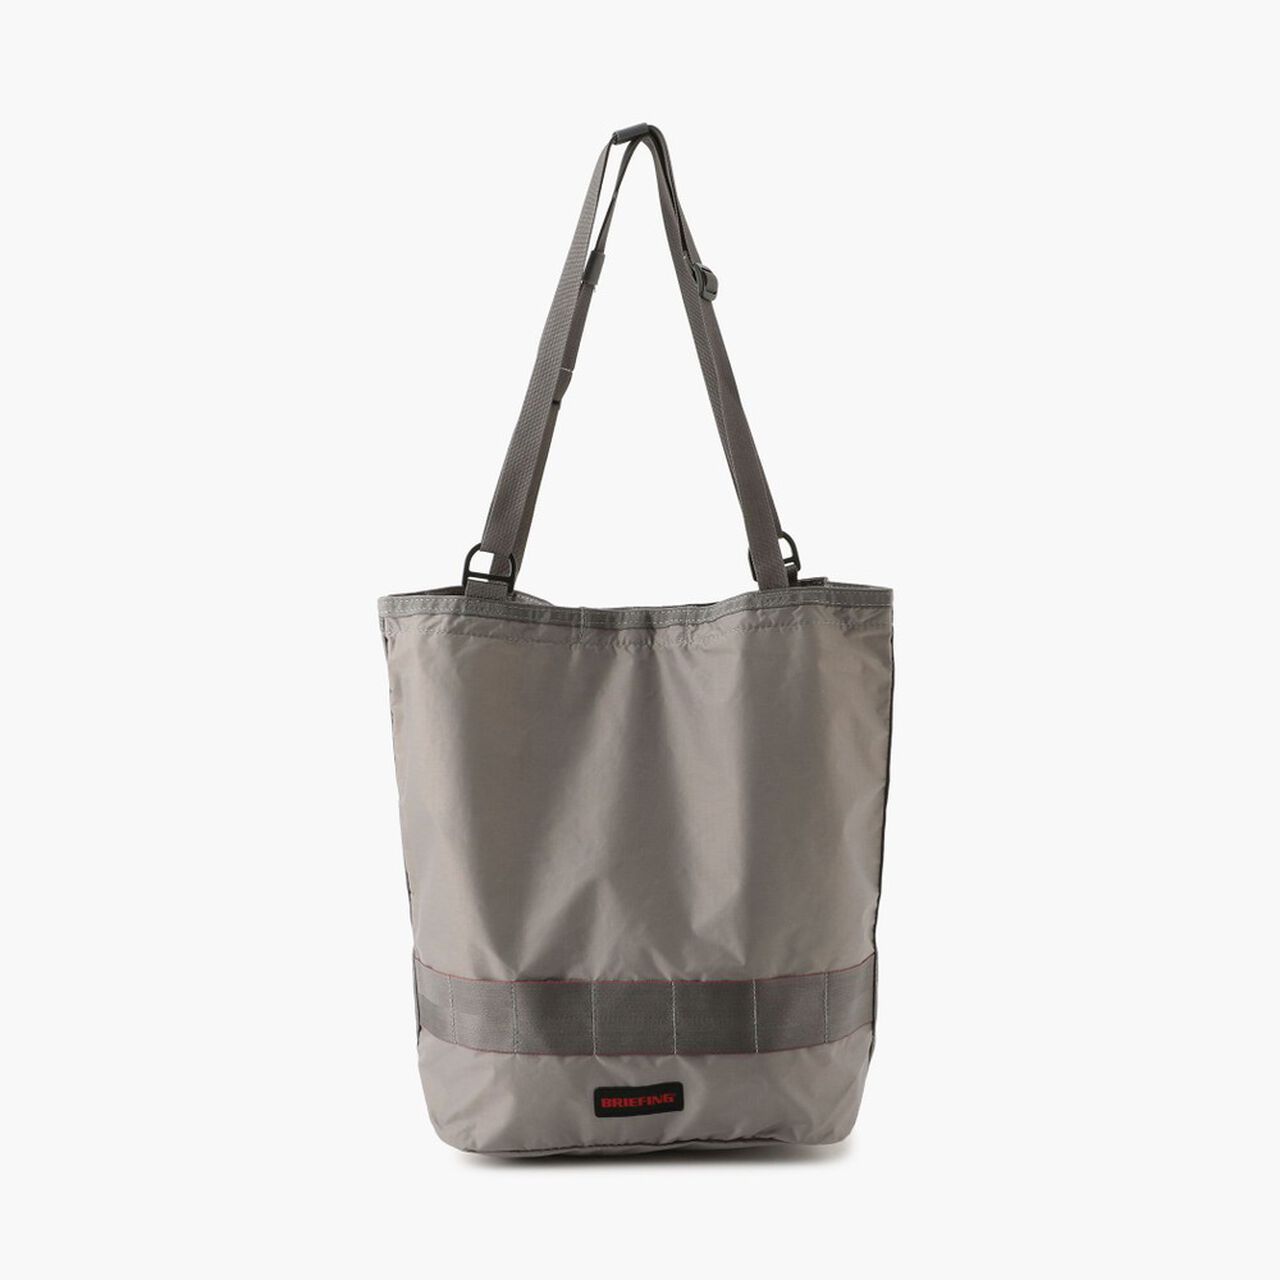 2WAY TOTE SL PACKABLE SM,Gray, large image number 0